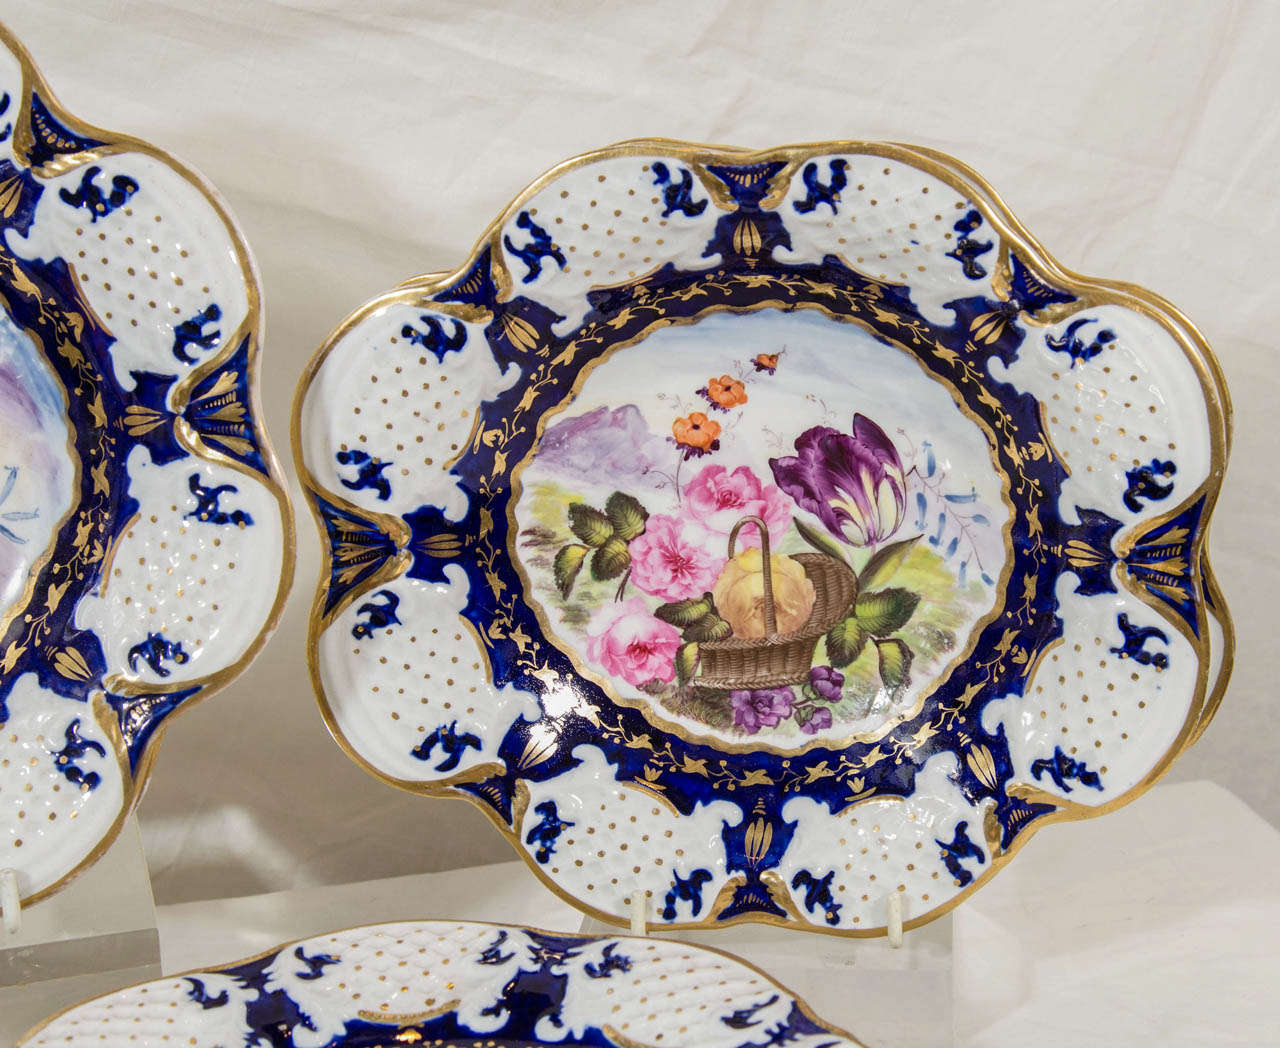 English A Set of Dishes: A Dessert Service with Cobalt Blue and a Basket of Flowers